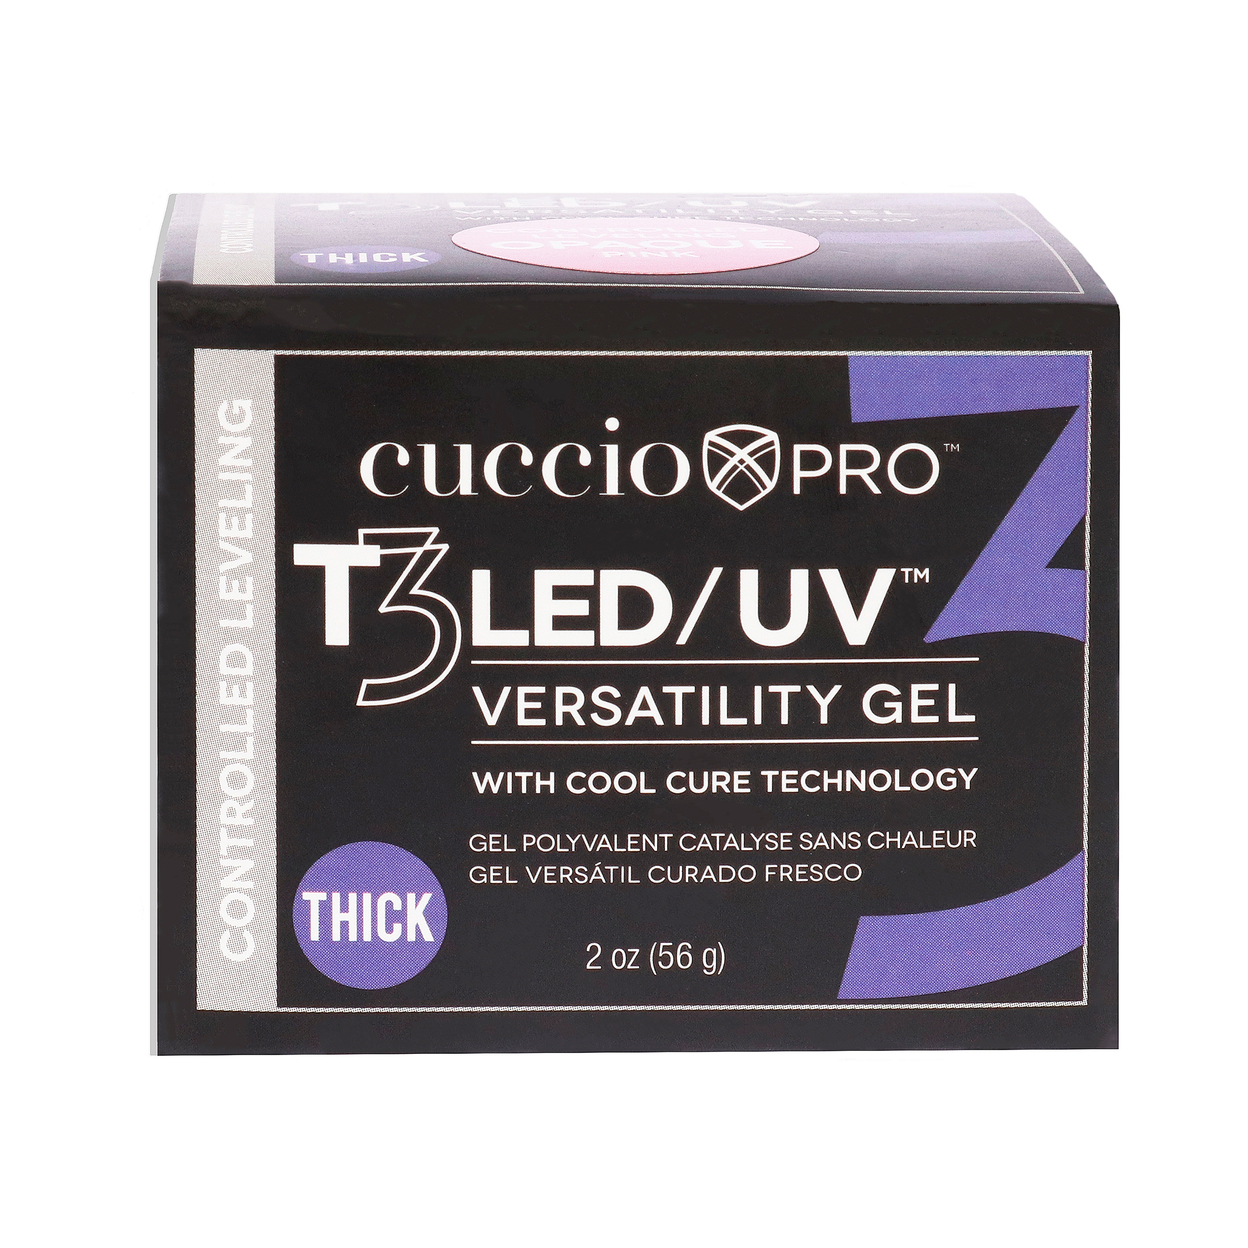 Cuccio Pro T3 Cool Cure Versatility Gel - Controlled Leveling Opaque Pink Nail Gel 2 Oz